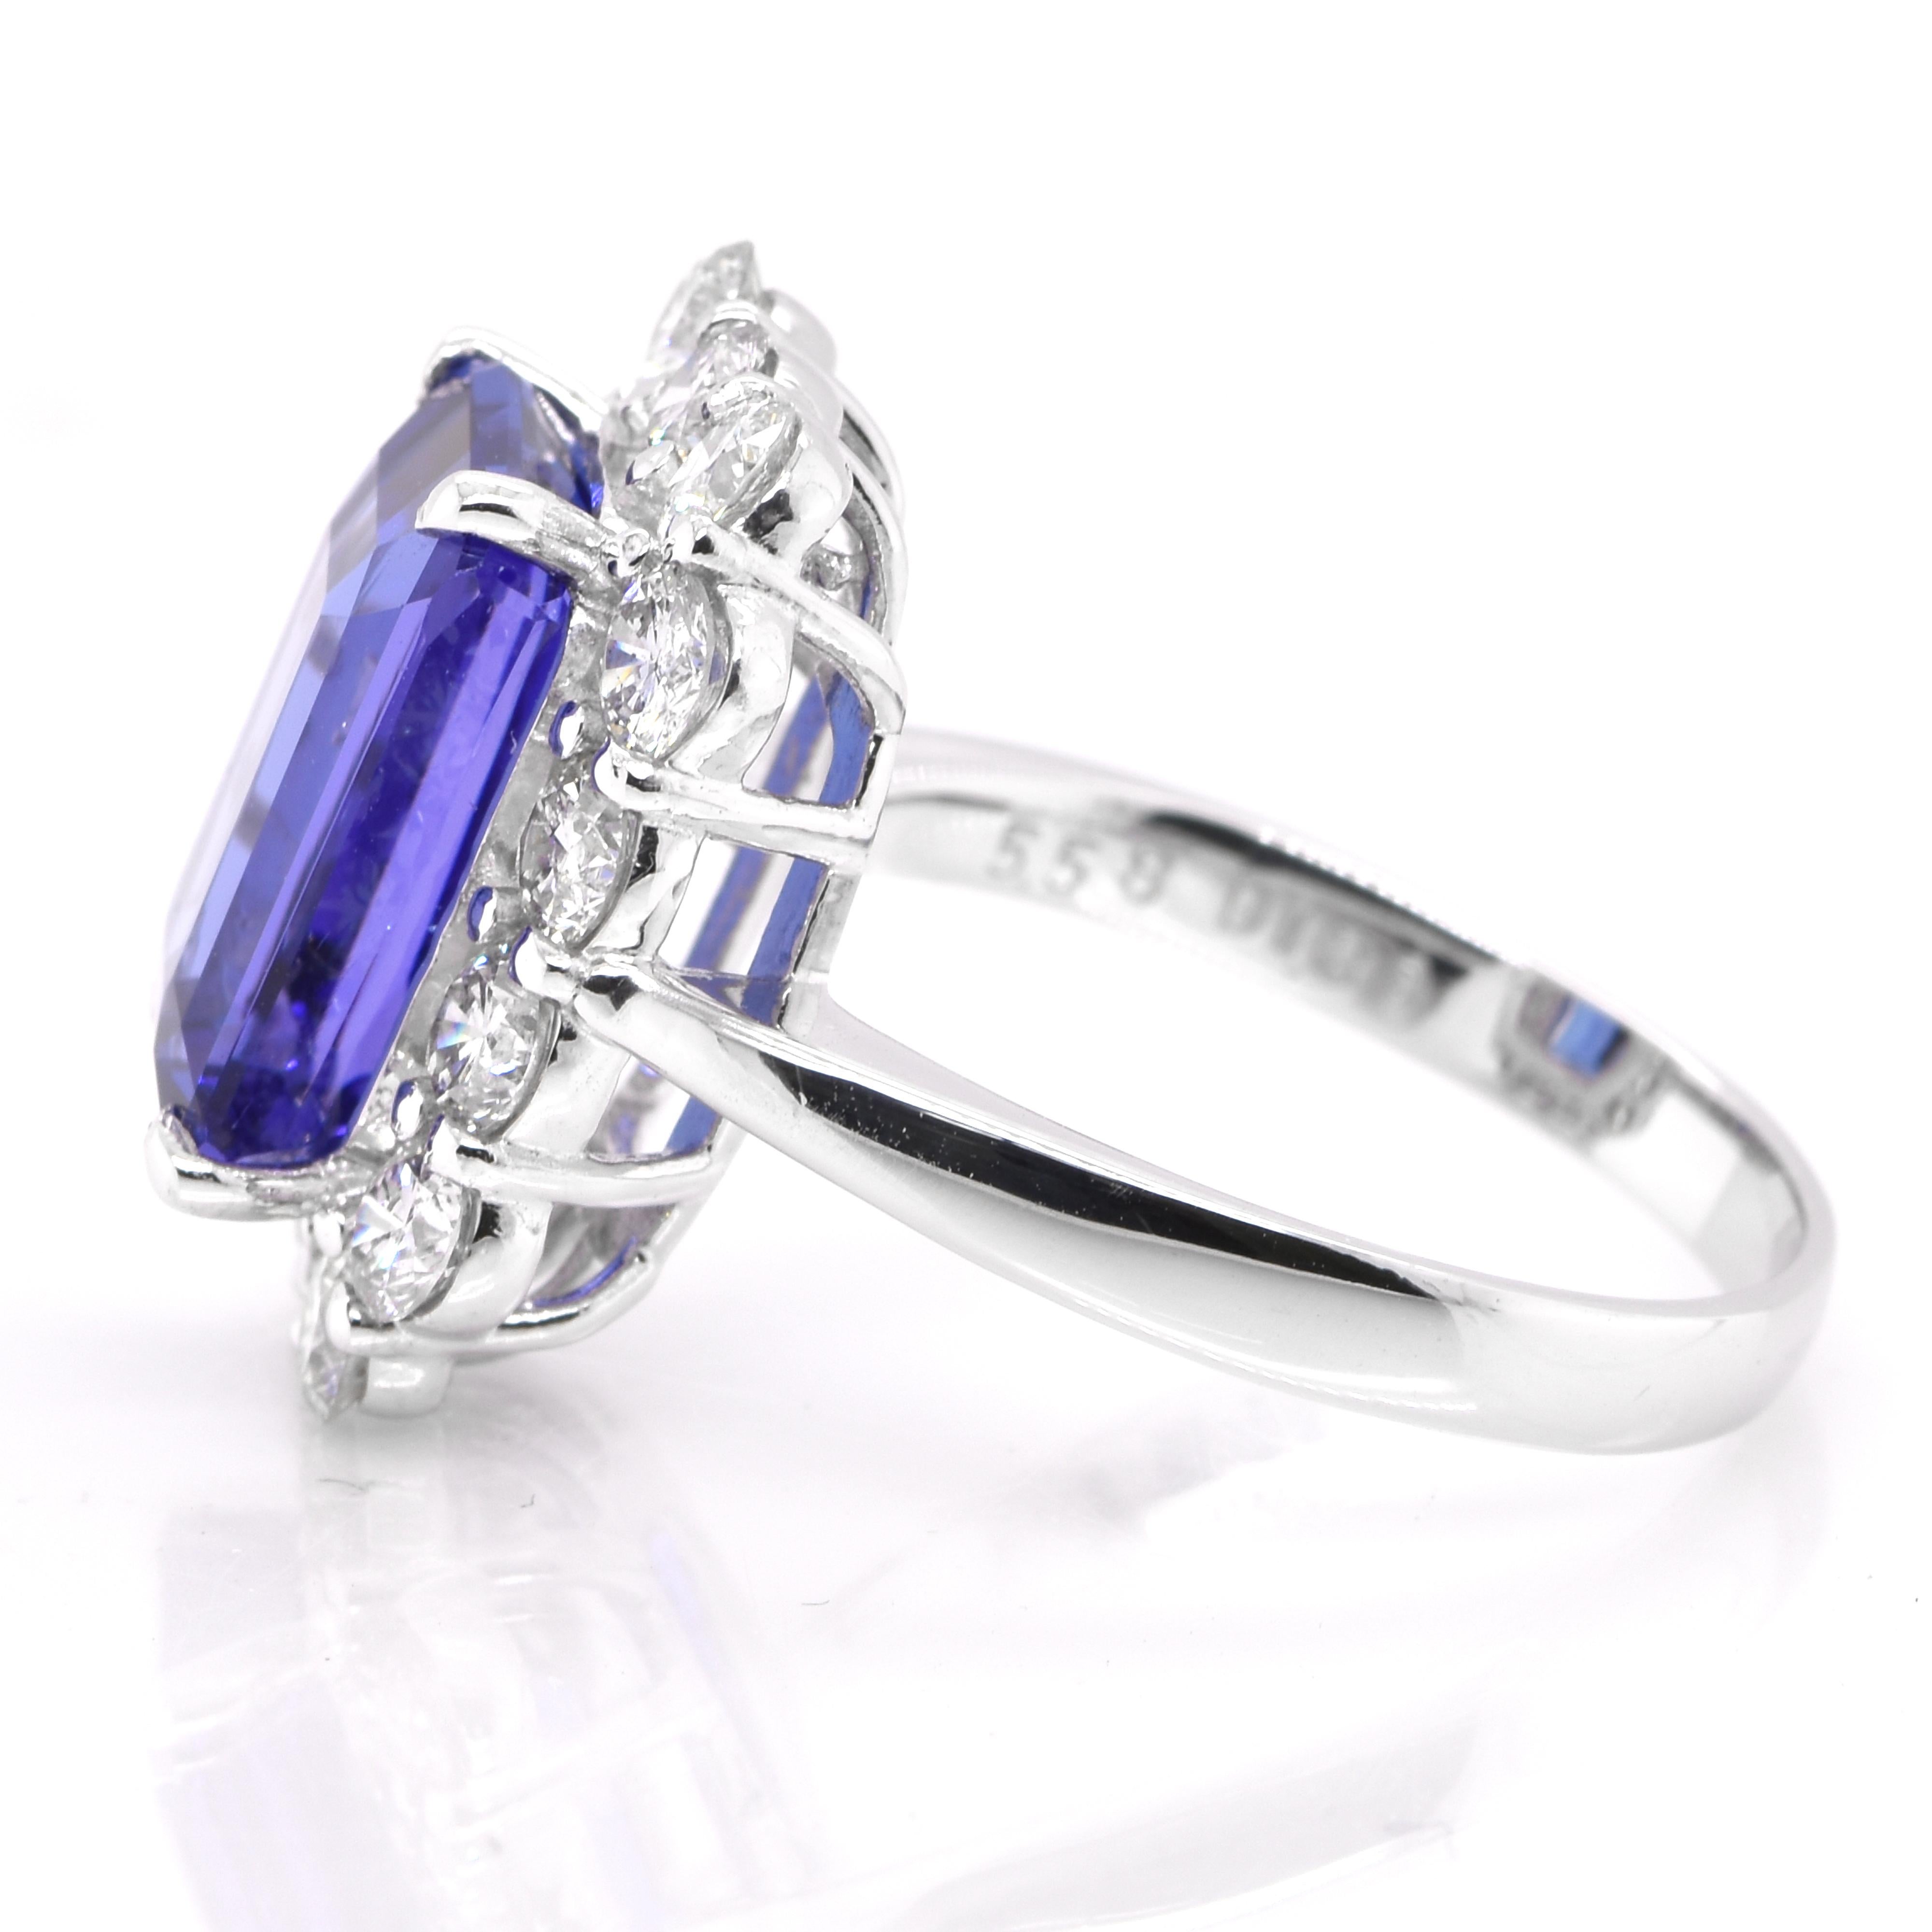 Octagon Cut 5.58 Carat Natural Octogon Tanzanite and Diamond Cocktail Ring Set in Platinum For Sale